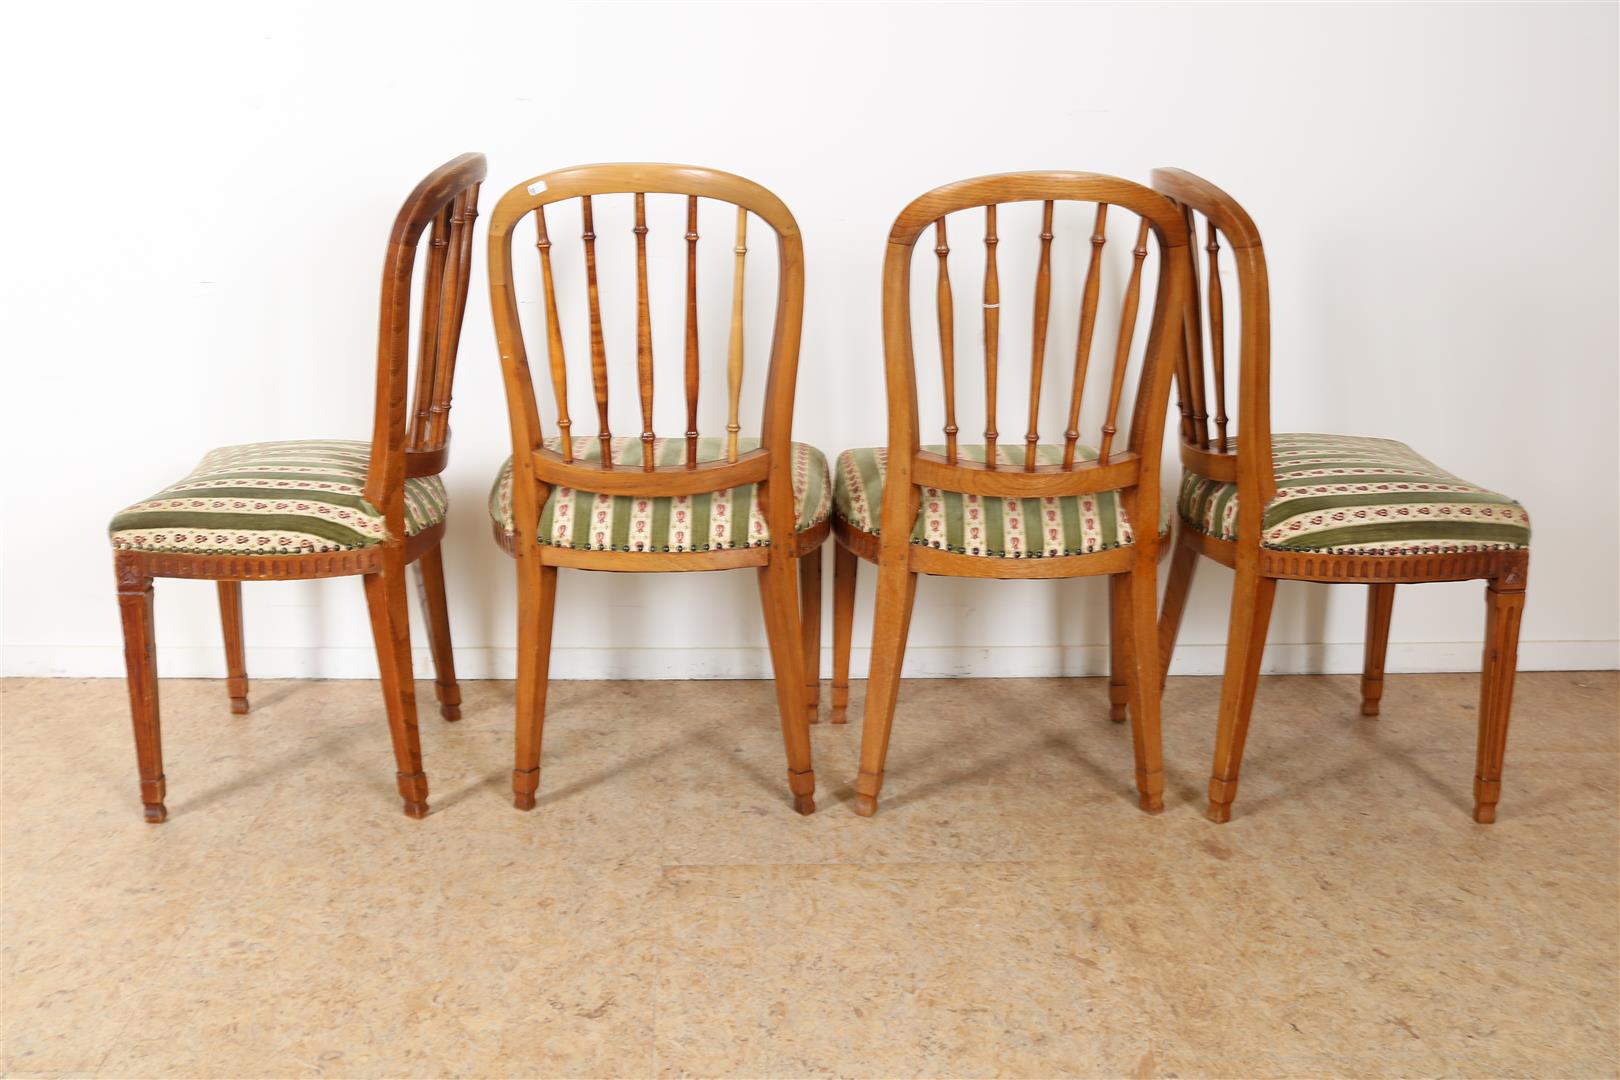 Series of 12 elm wood Louis XVI  chairs with horseshoe-shaped bars backrest and striped velvet - Image 5 of 5